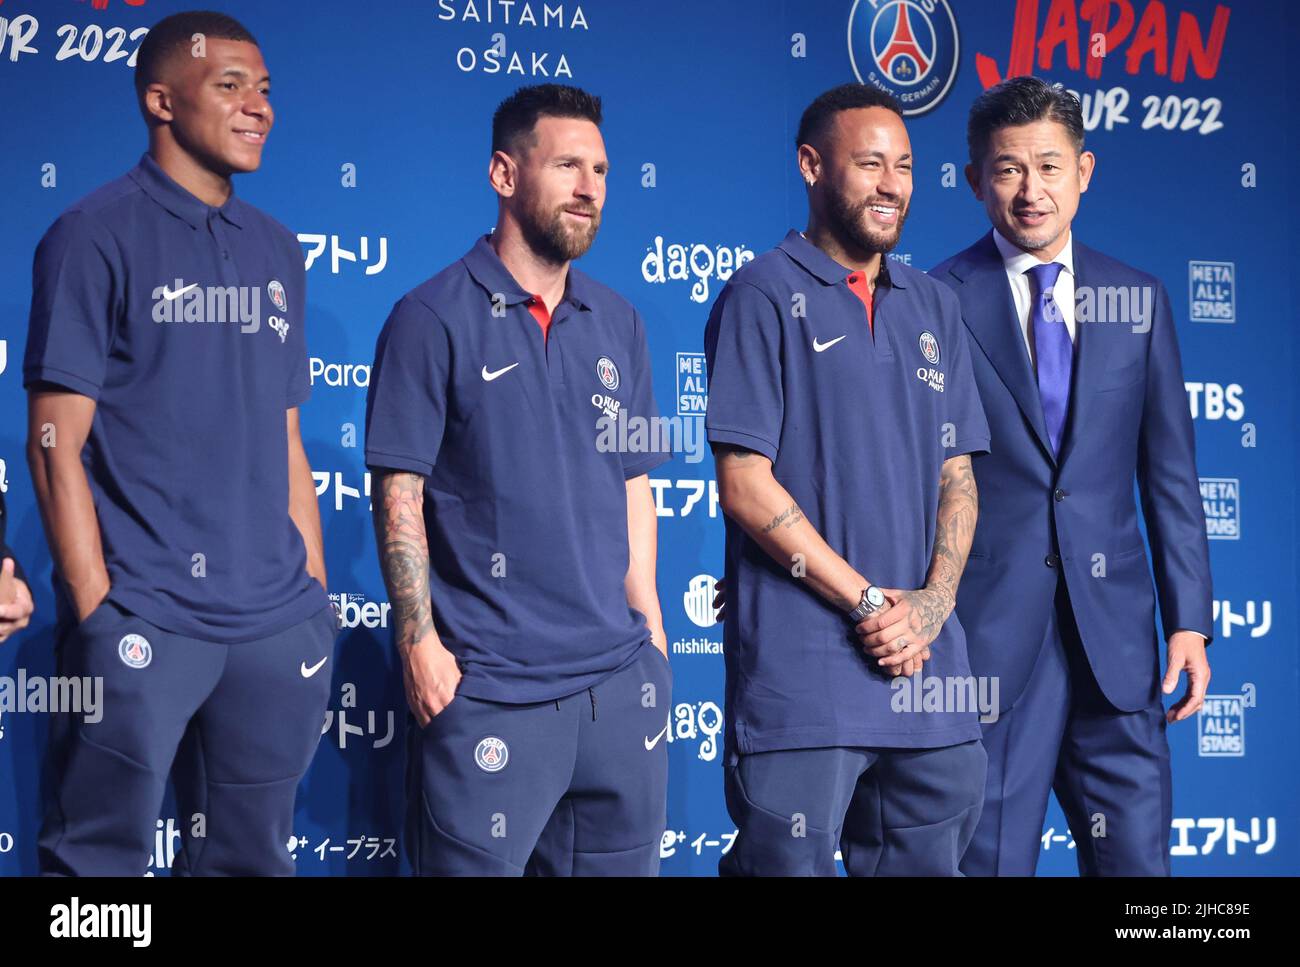 Tokyo, Japan. 17th July, 2022. (L-R) French football club team Paris Saint-Germain star players Kylian Mbappe, Lionel Messi and Neymar Jr with Japanese football legend Kazuyoshi Miura pose for photo at a press conference upon their arrival in Tokyo on Sunday, July 17, 2022. Paris Saint-Germain will have Japanese club teams Kawasaki Frontale, Urawa Reds and Gamba Osaka for their Japan tour. Credit: Yoshio Tsunoda/AFLO/Alamy Live News Stock Photo